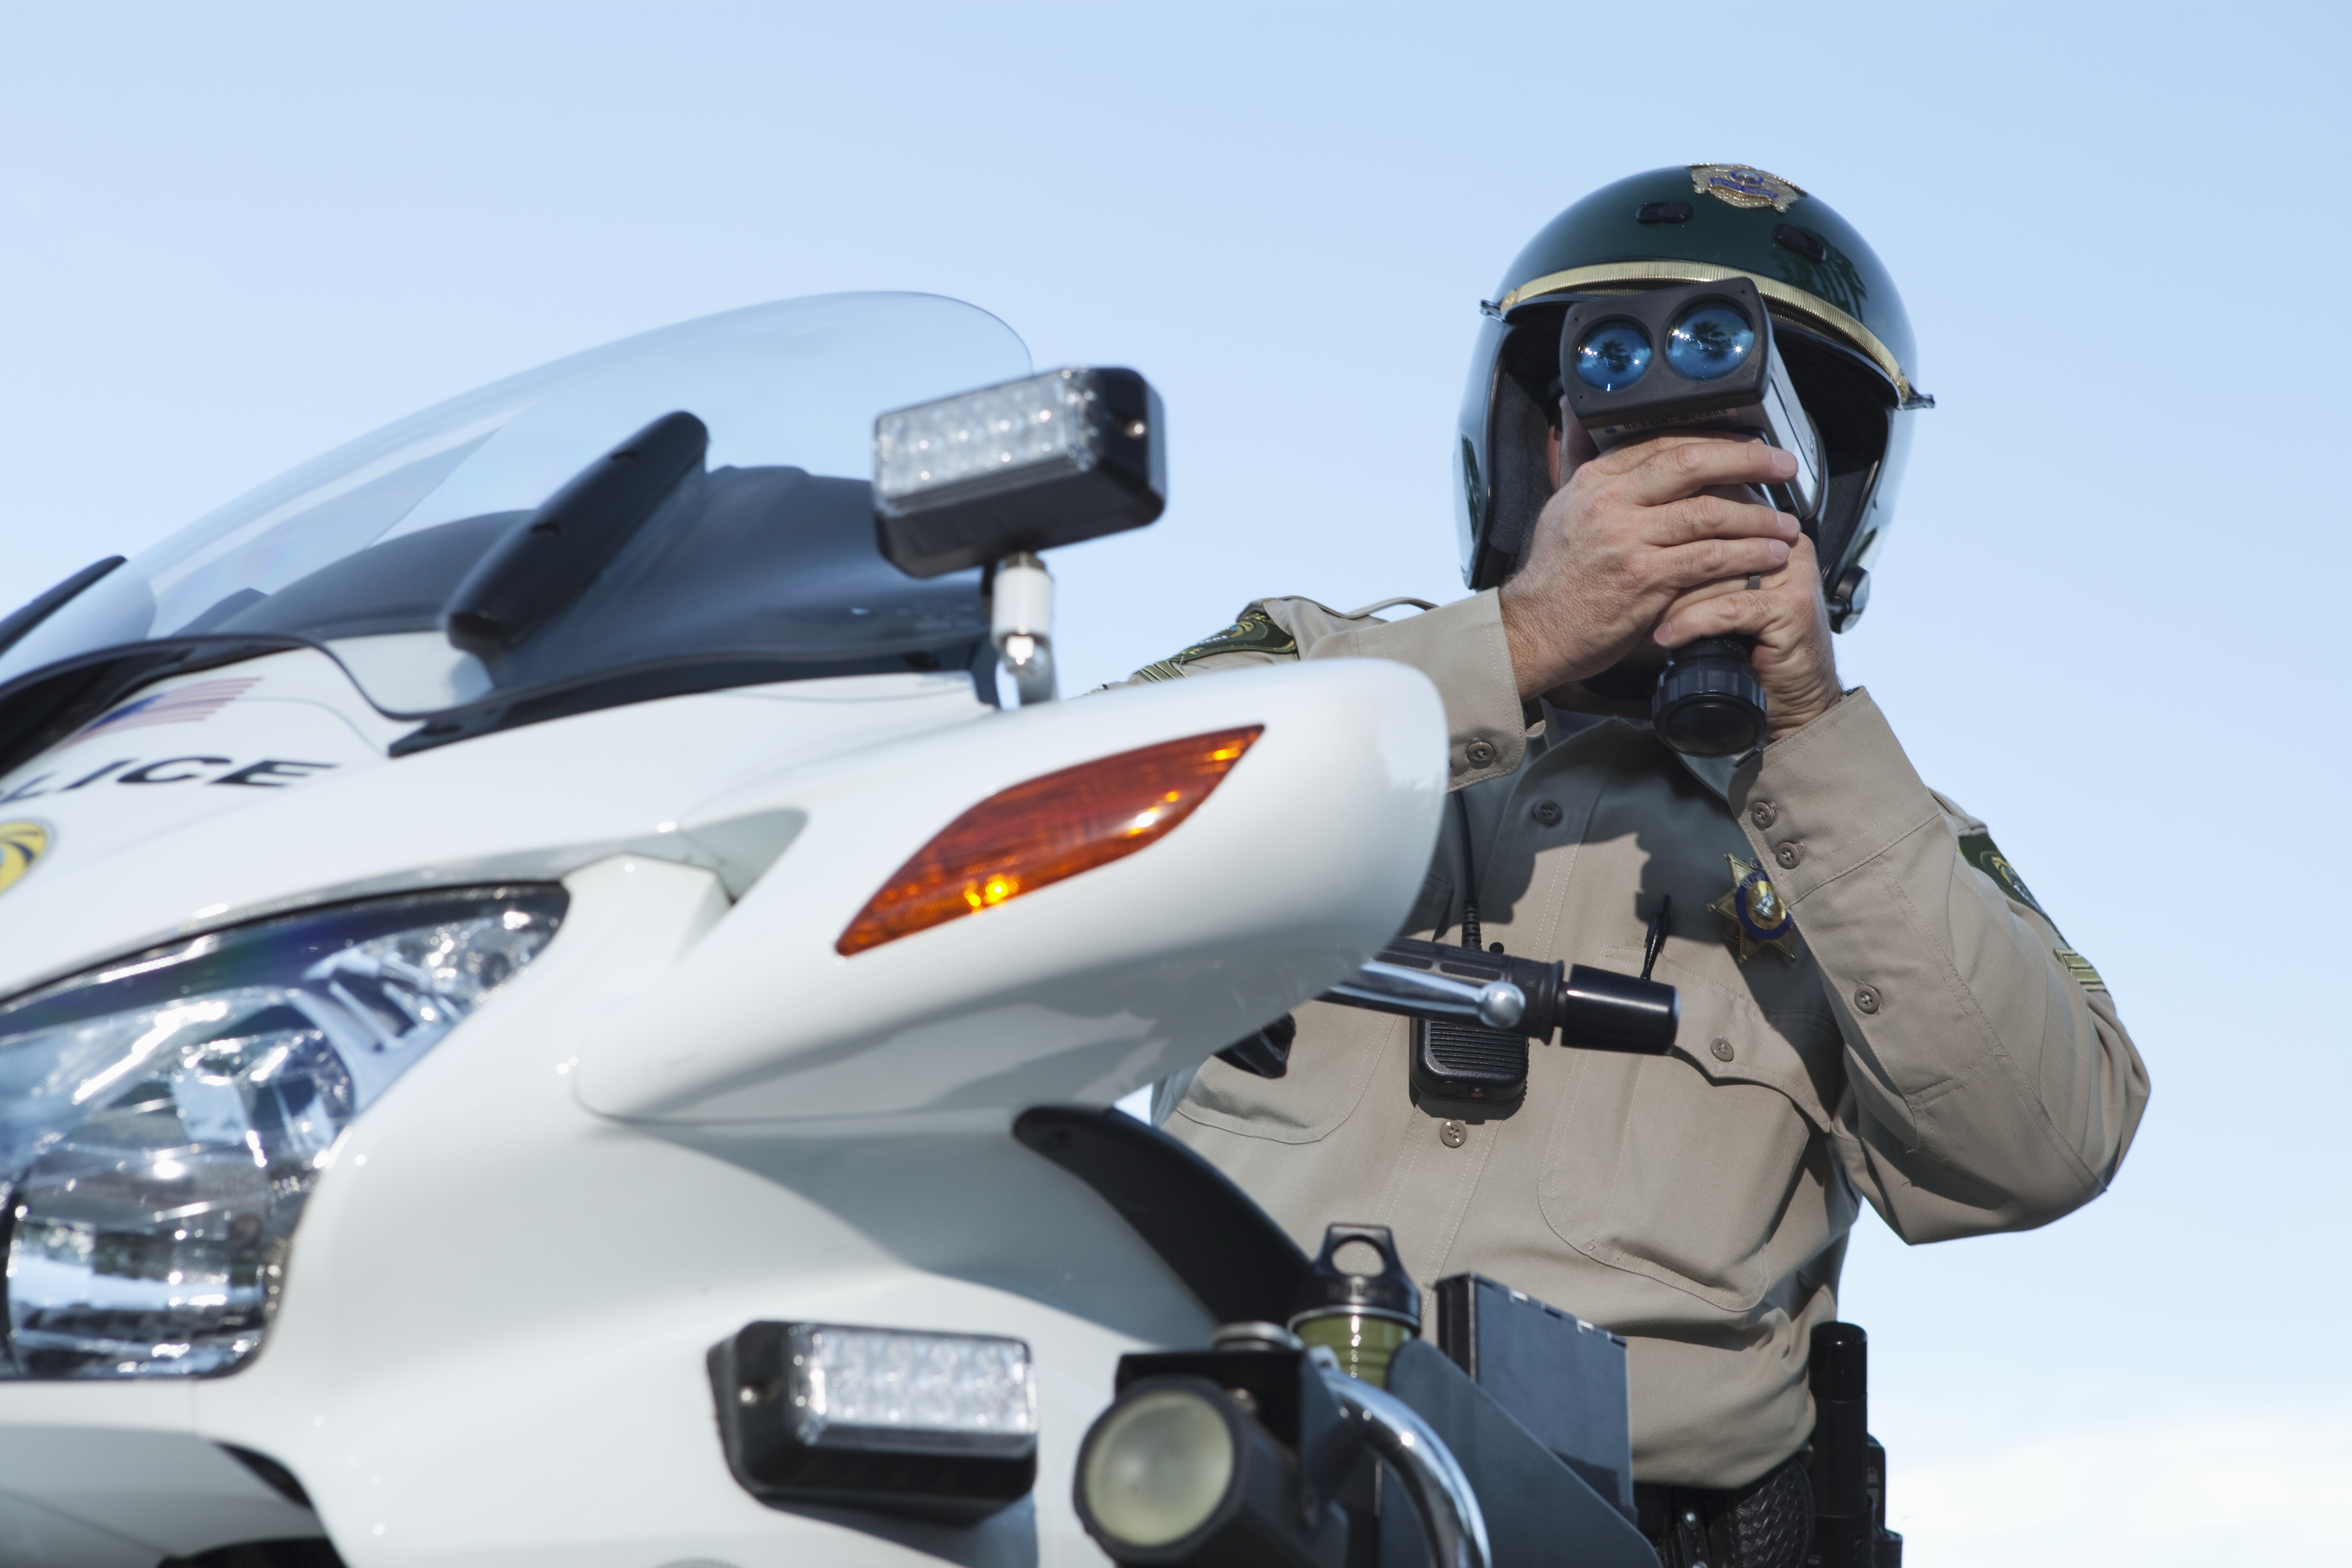 A police offer utilizing law enforcement technology to check traffic speed.